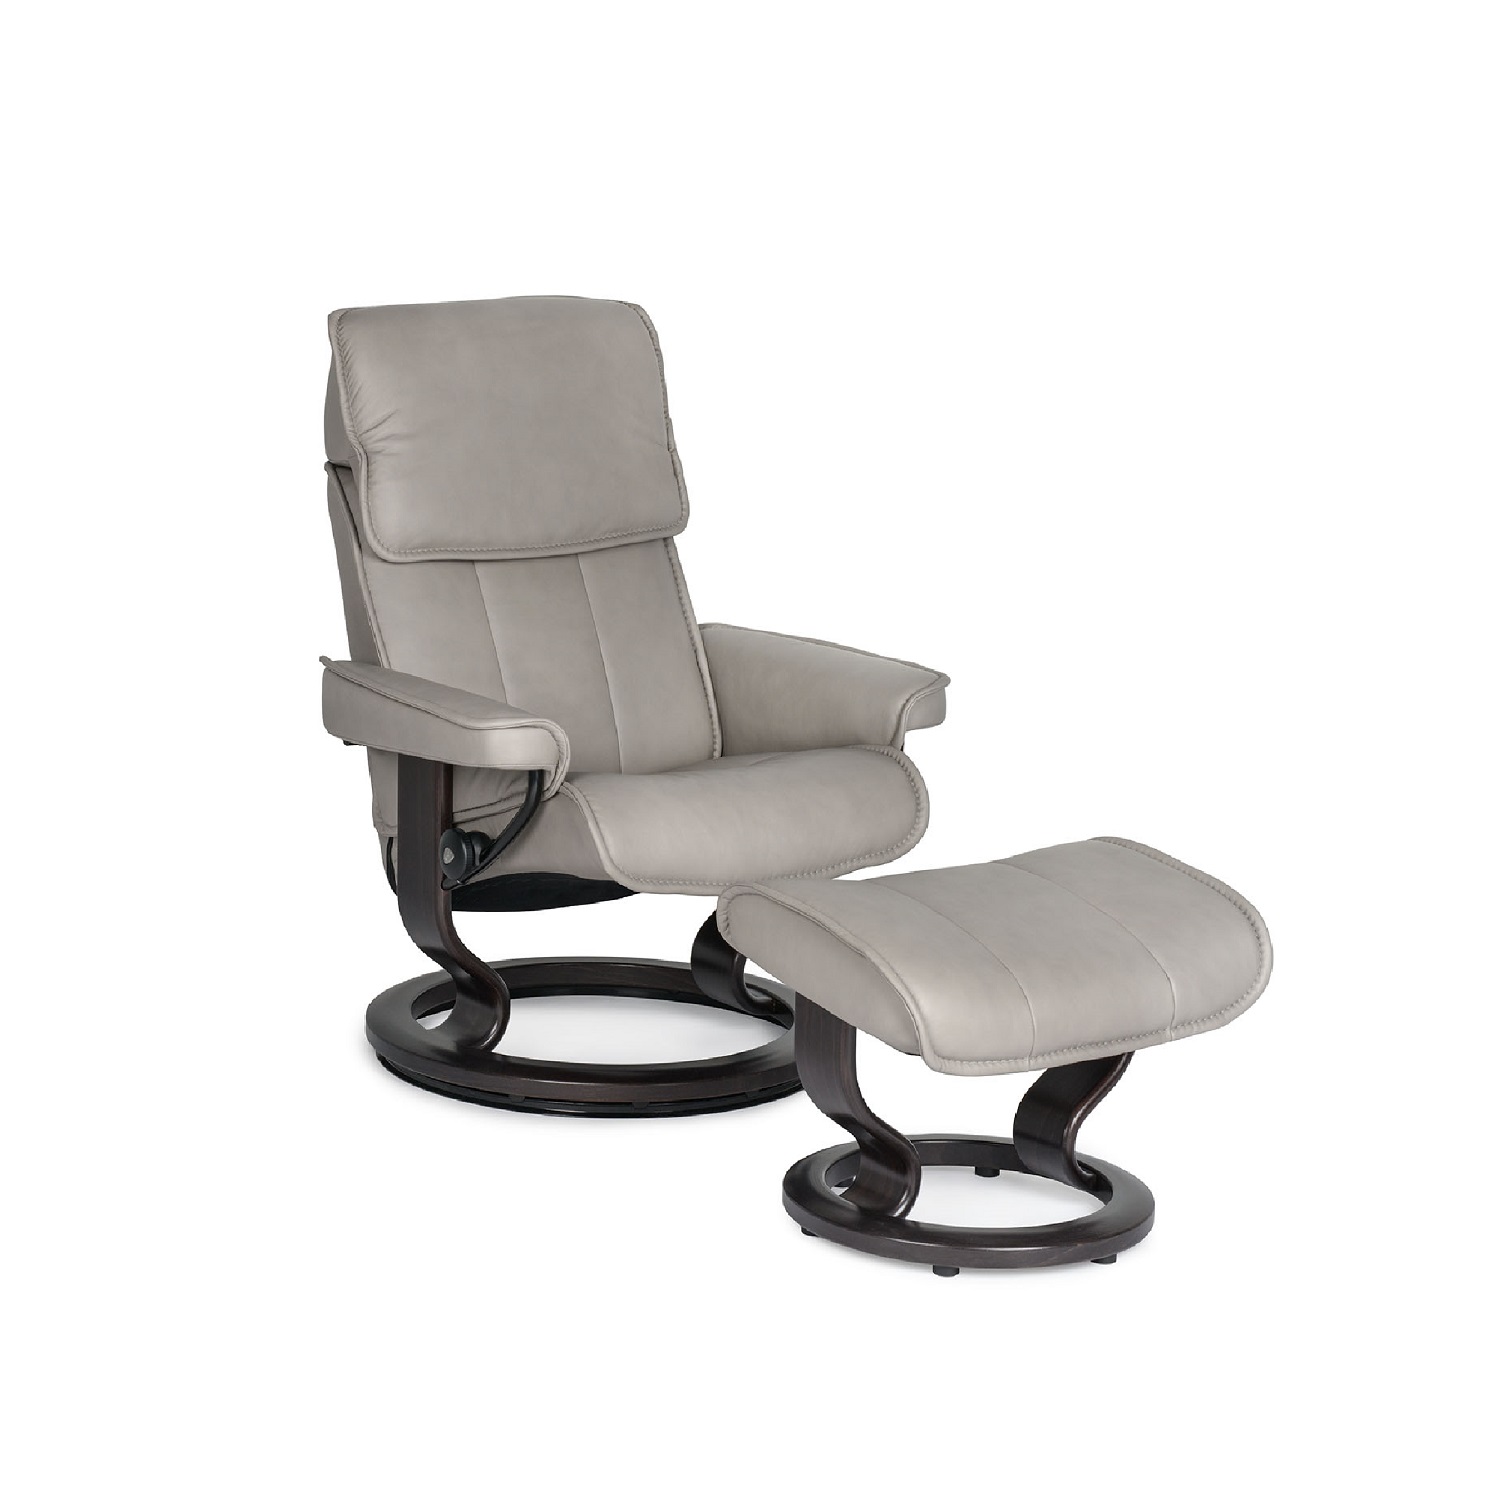 The Admiral Large Chair Ottoman